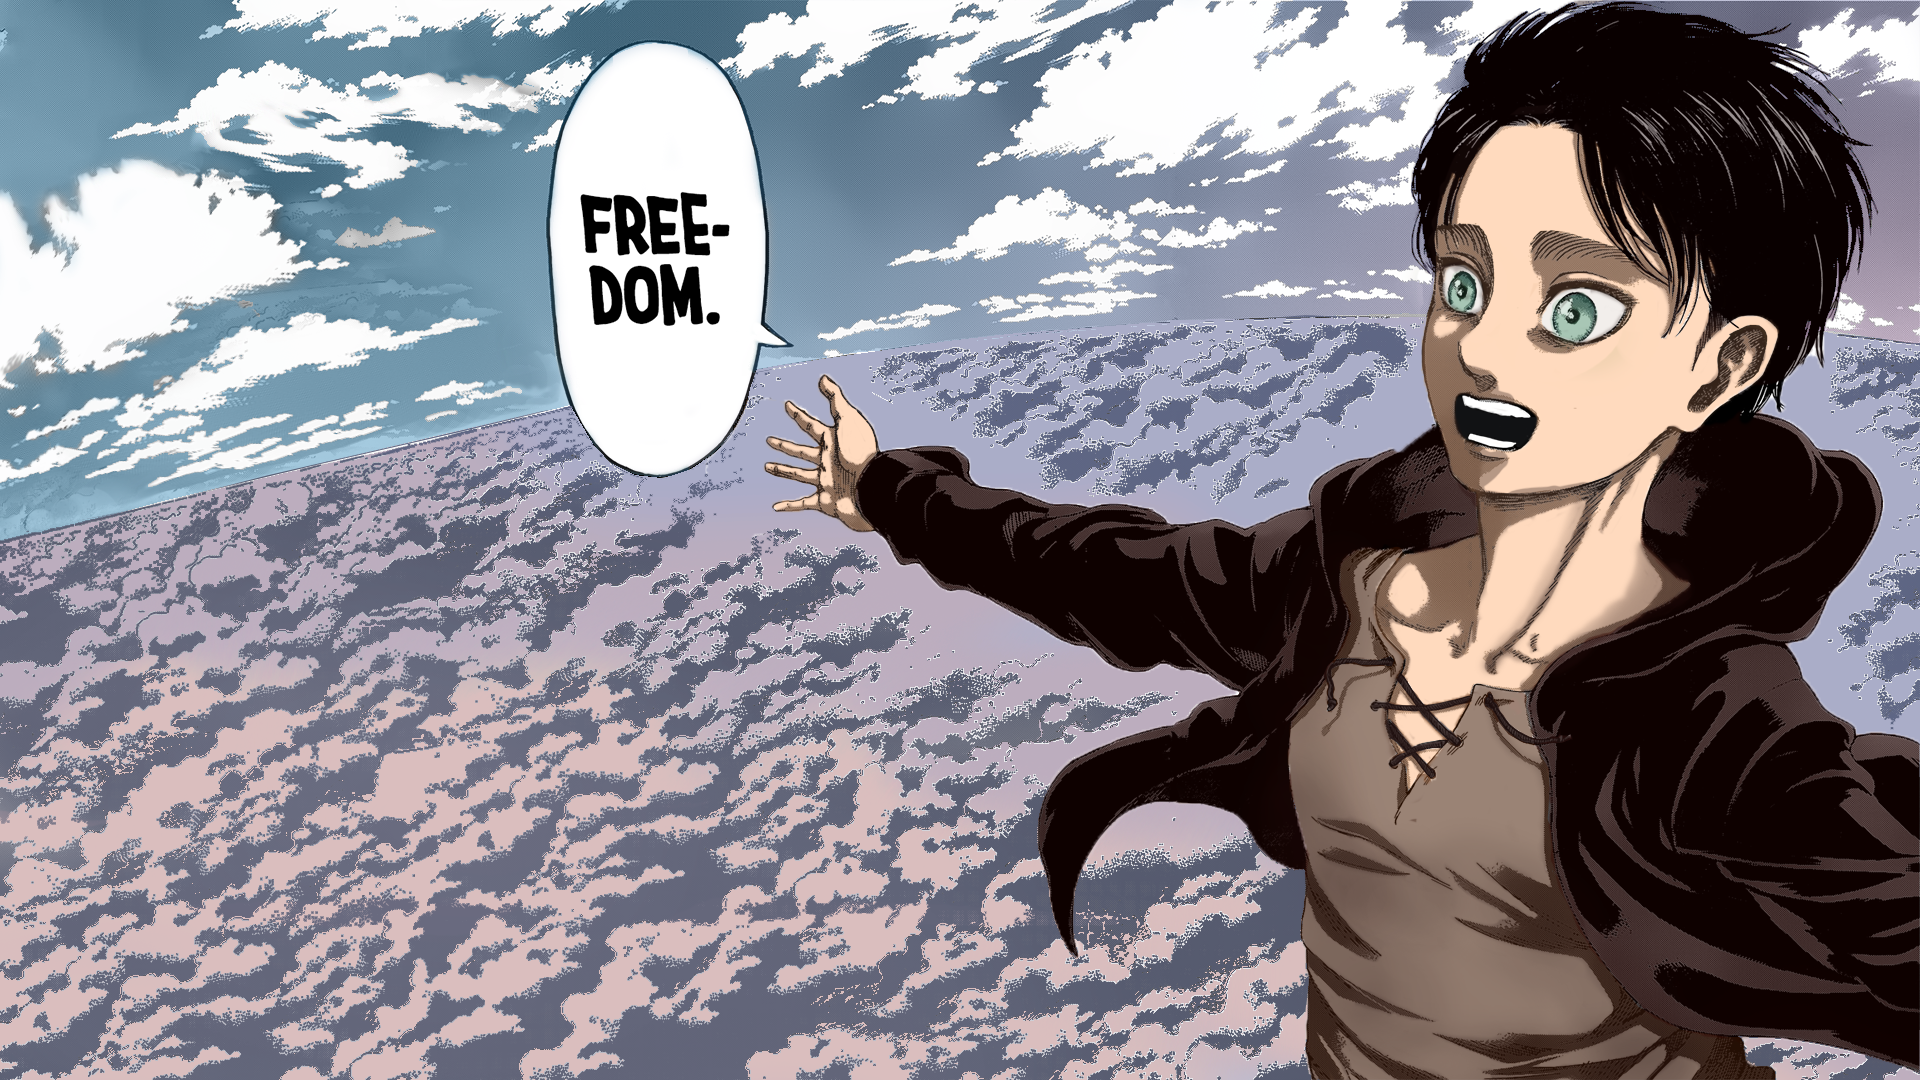 colorized the F R E E D O M panel and formatted it for a desktop